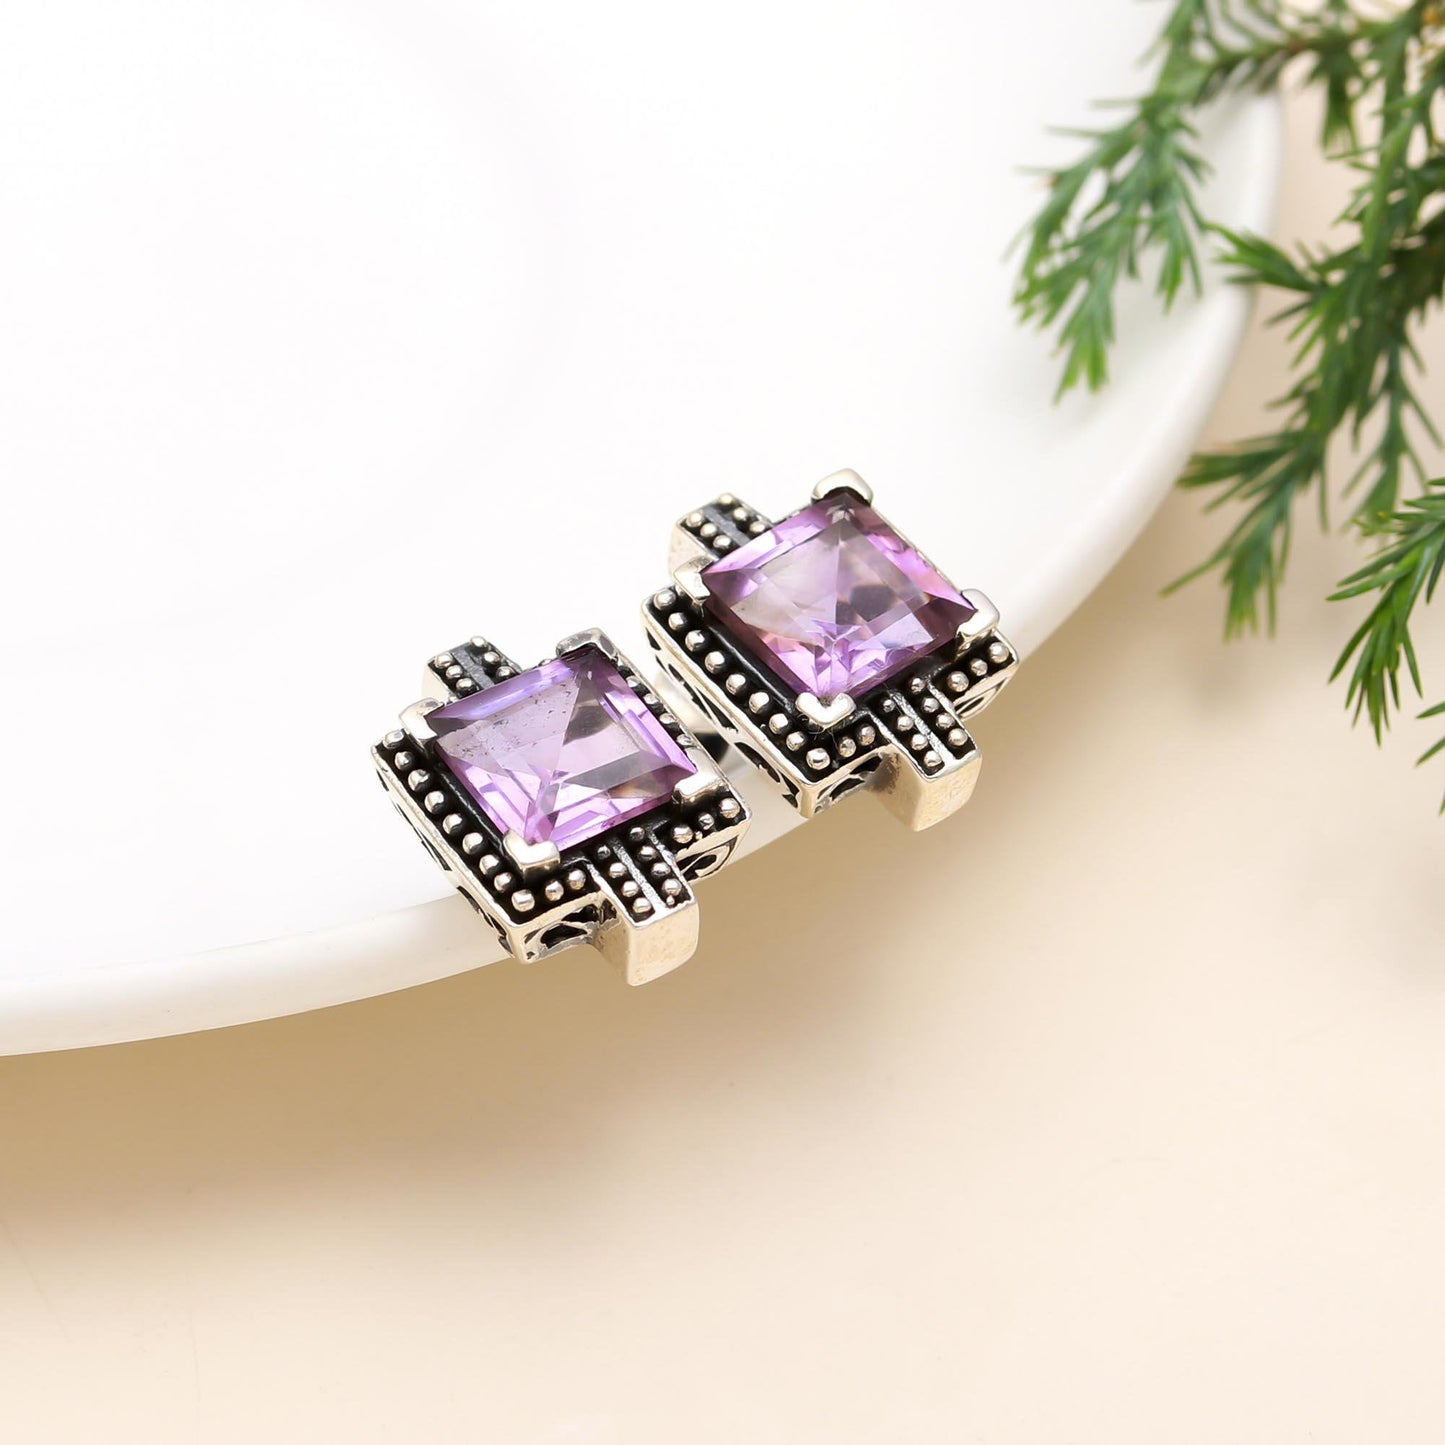 Solid 925 Sterling Silver Faceted Amethyst Stud Earrings in Square Shape, Handmade, Gift for Her / Birthday / Anniversary/Oxodised / Antique